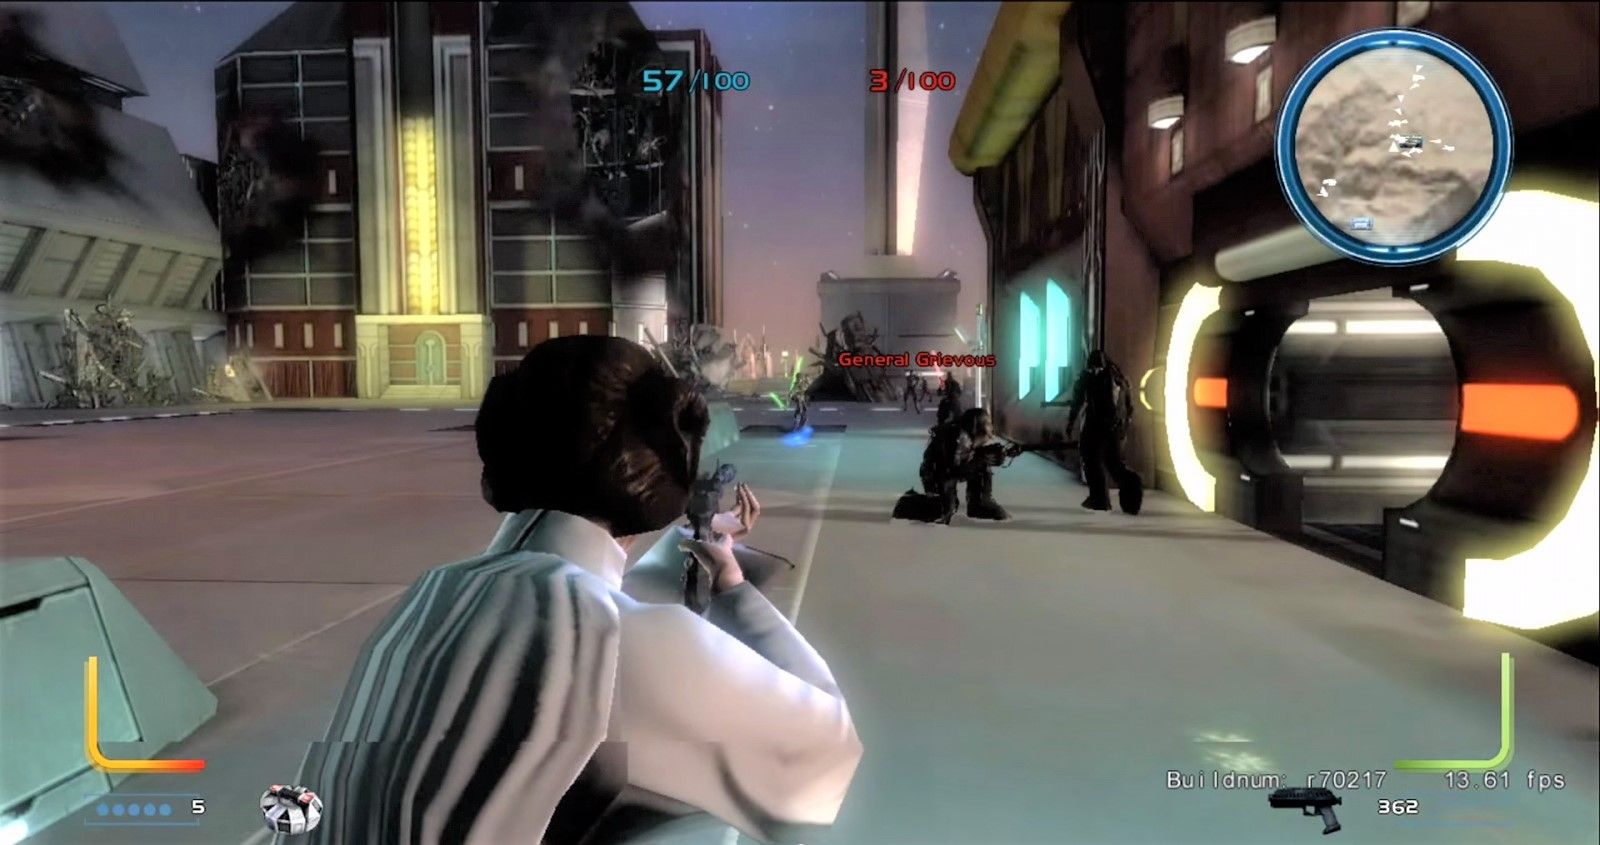 third person perspective of princess leia aiming weapon in star wars battle arena